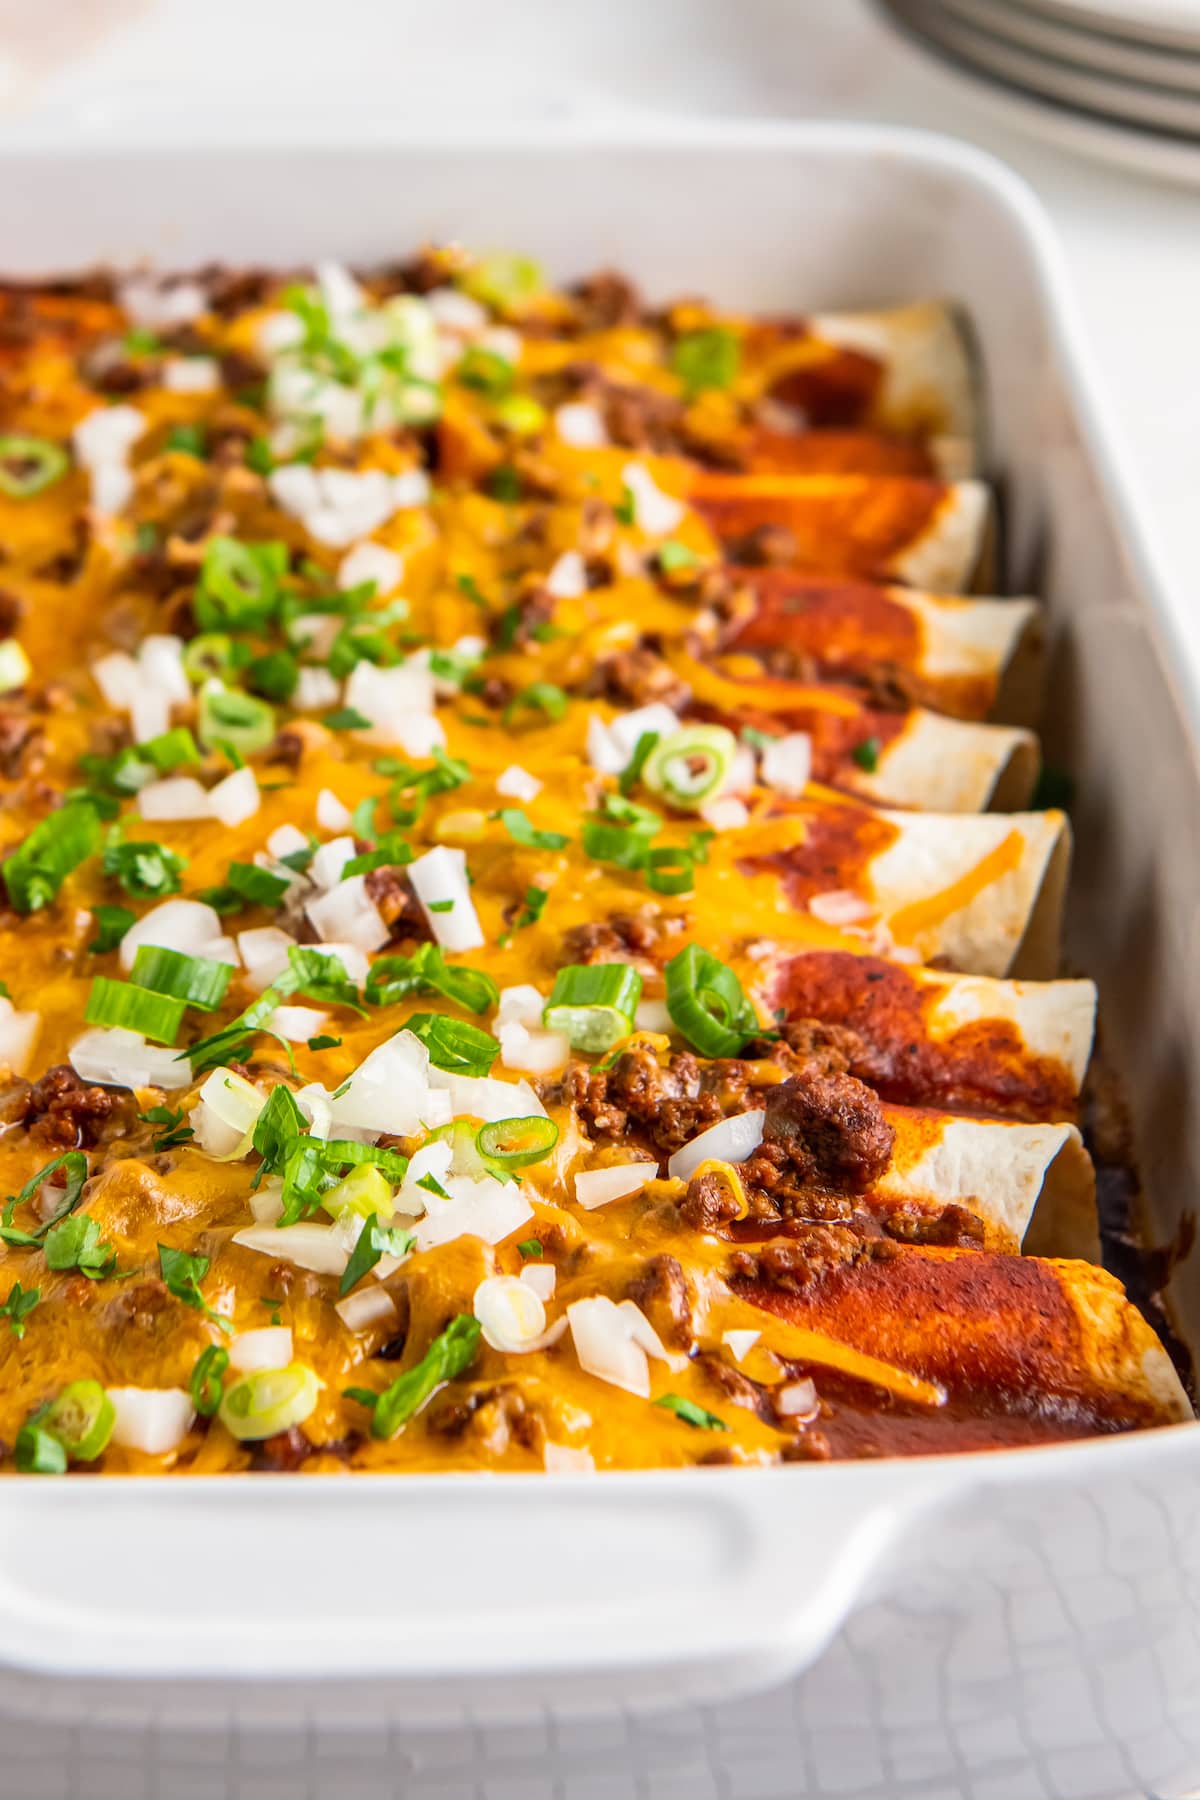 beef enchiladas that are topped with melted cheese, scallions, and diced onions